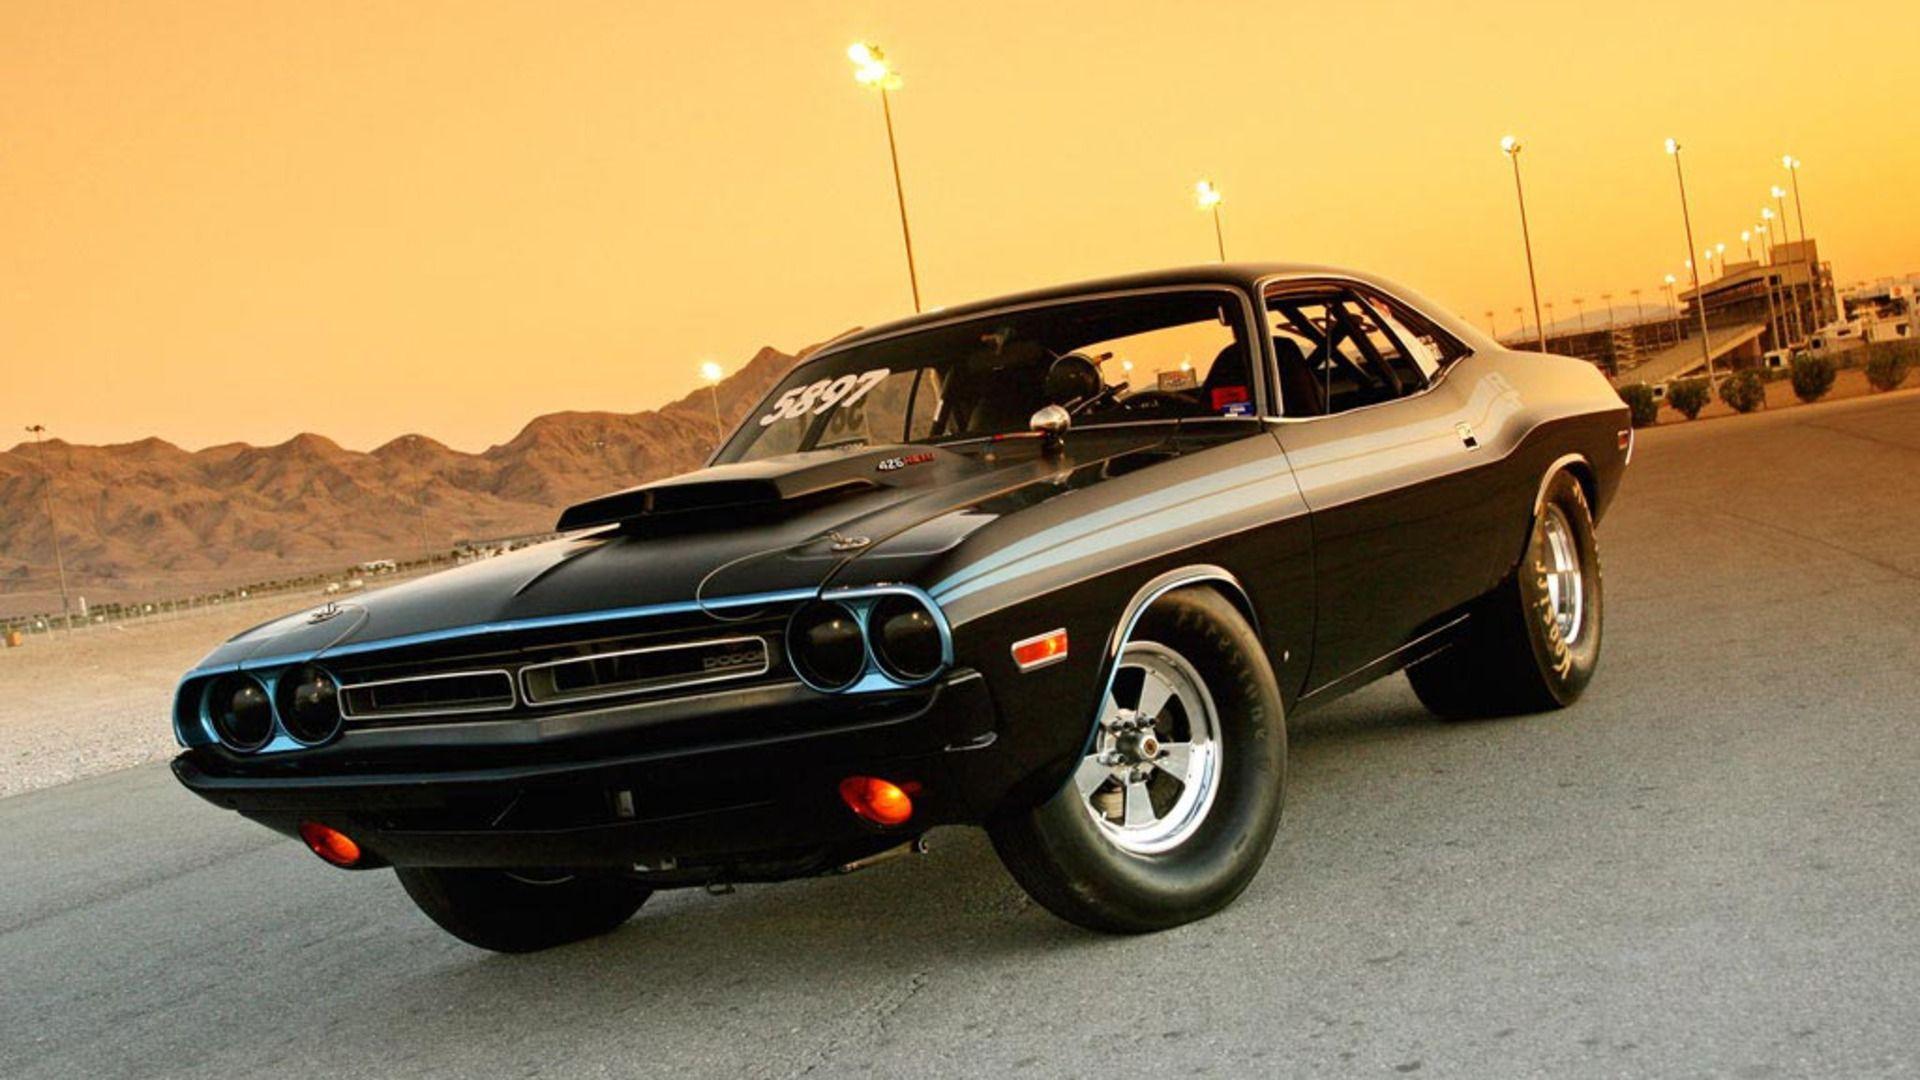 Muscle car wallpaper for laptop